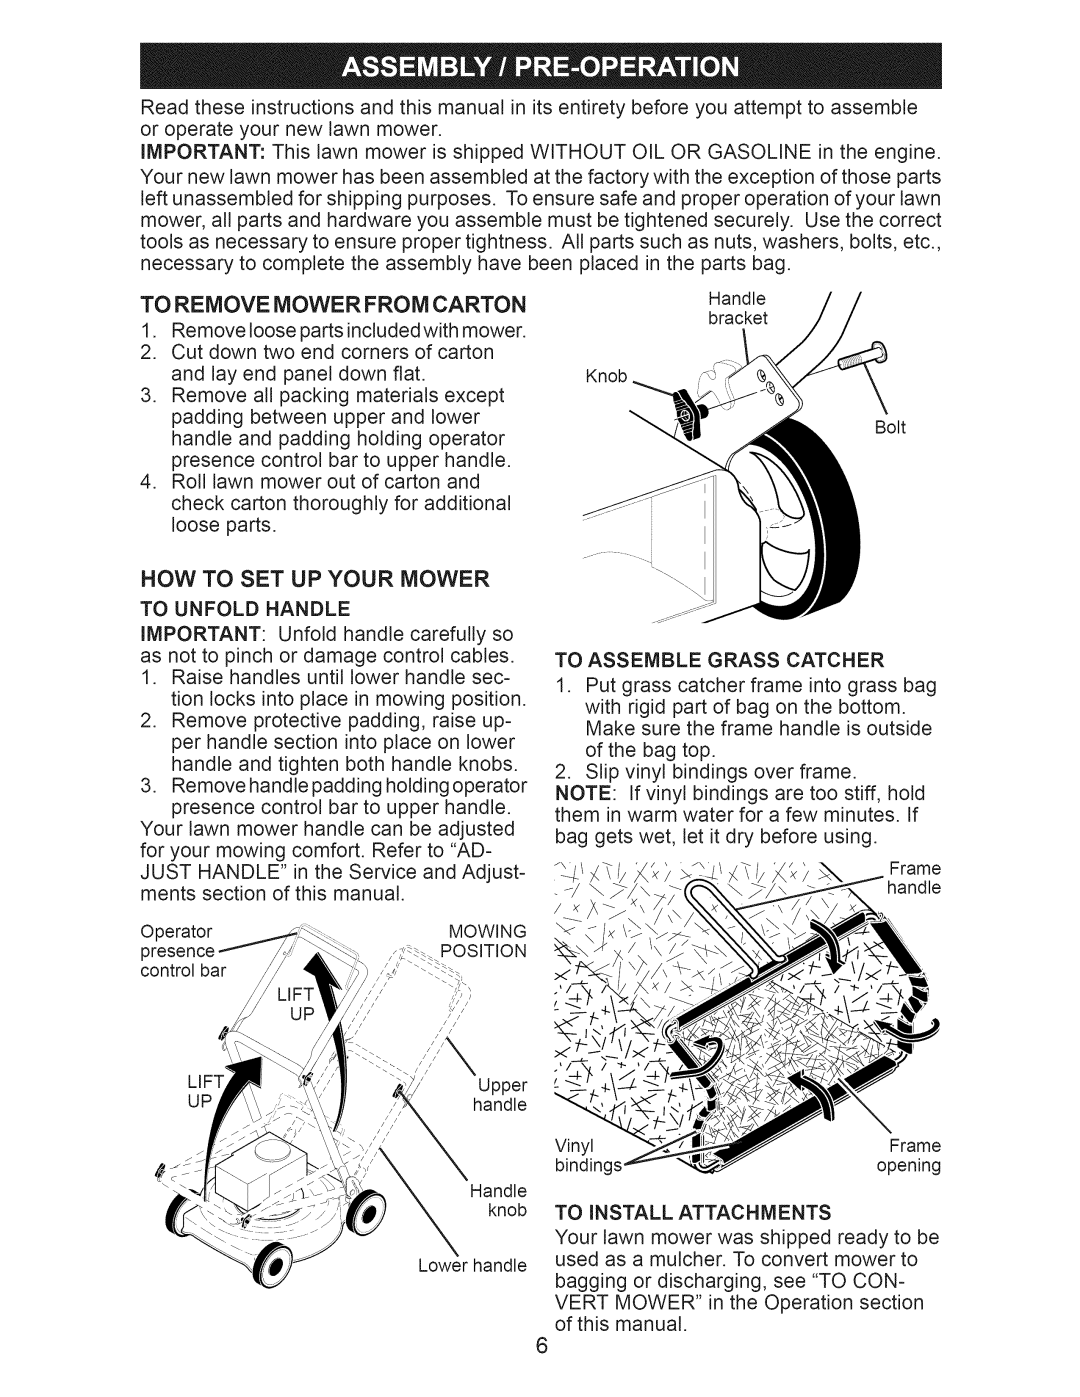 Craftsman 917.376391 owner manual To Remove Mower From Carton, Now To Set Up Your Mower 